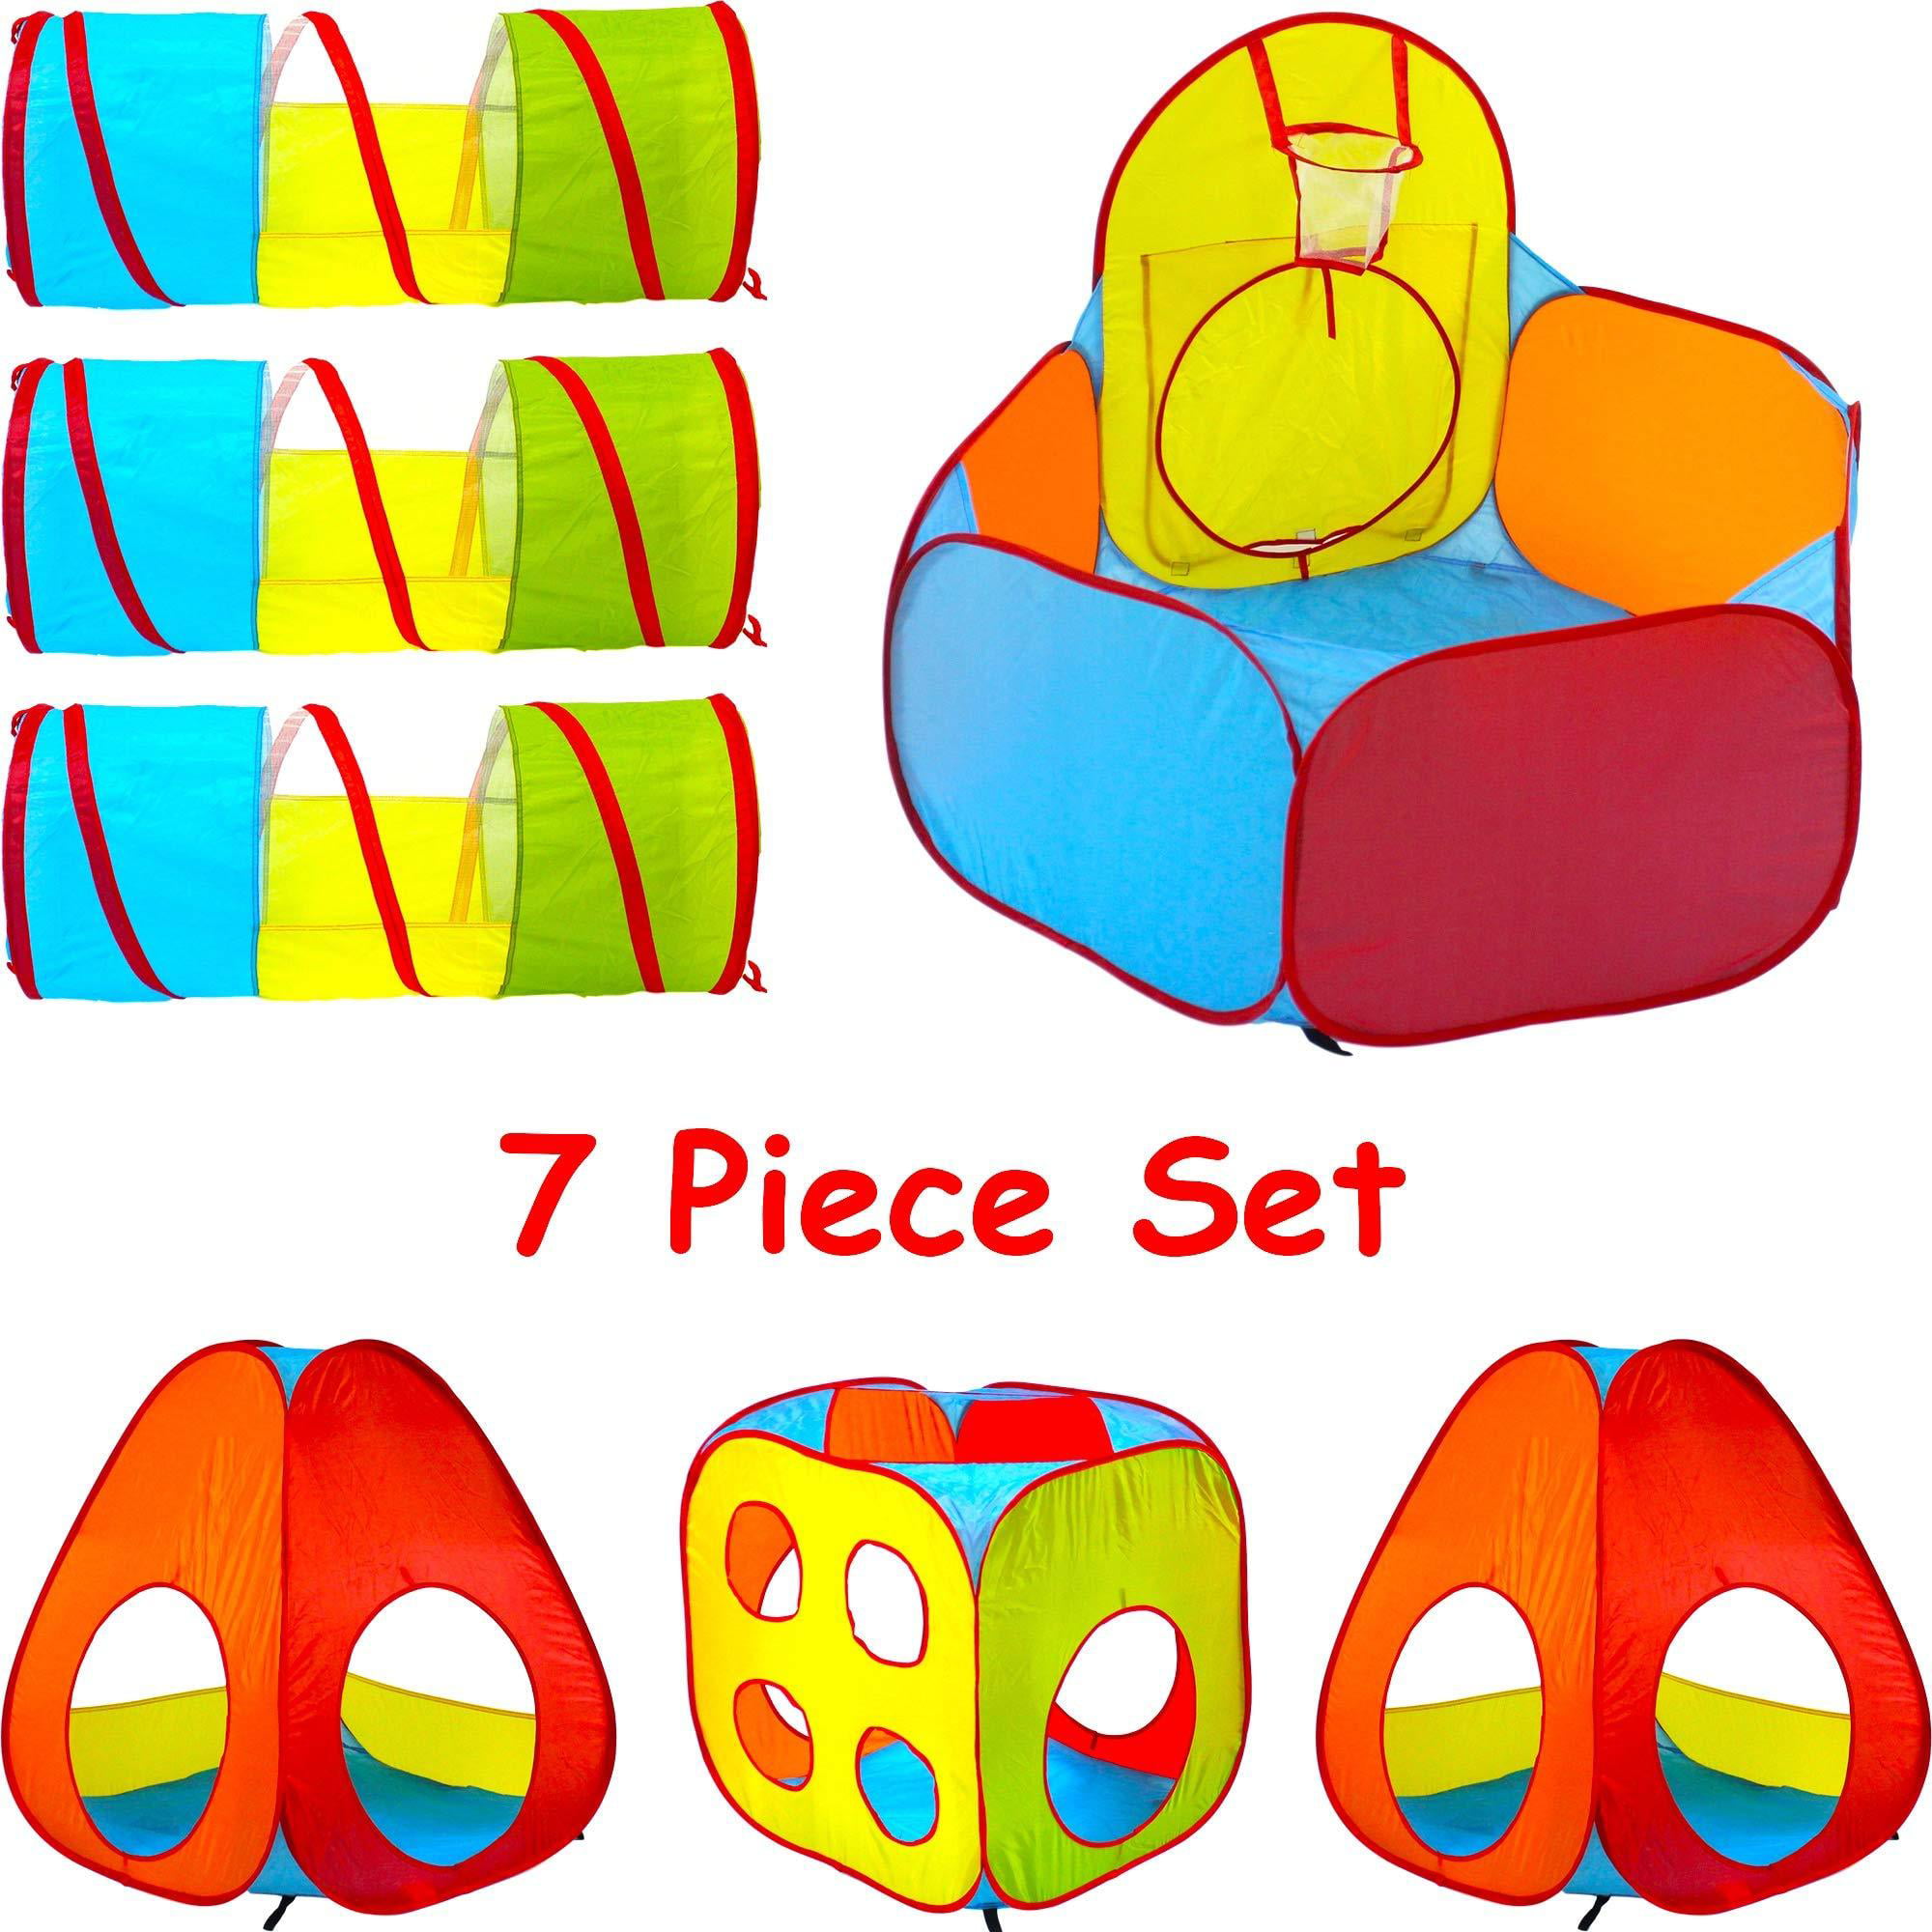 Gift for Toddler Boys & Girls BALL Pit Play Tent Tunnels Kids Best Birthday 1 2 for sale online 